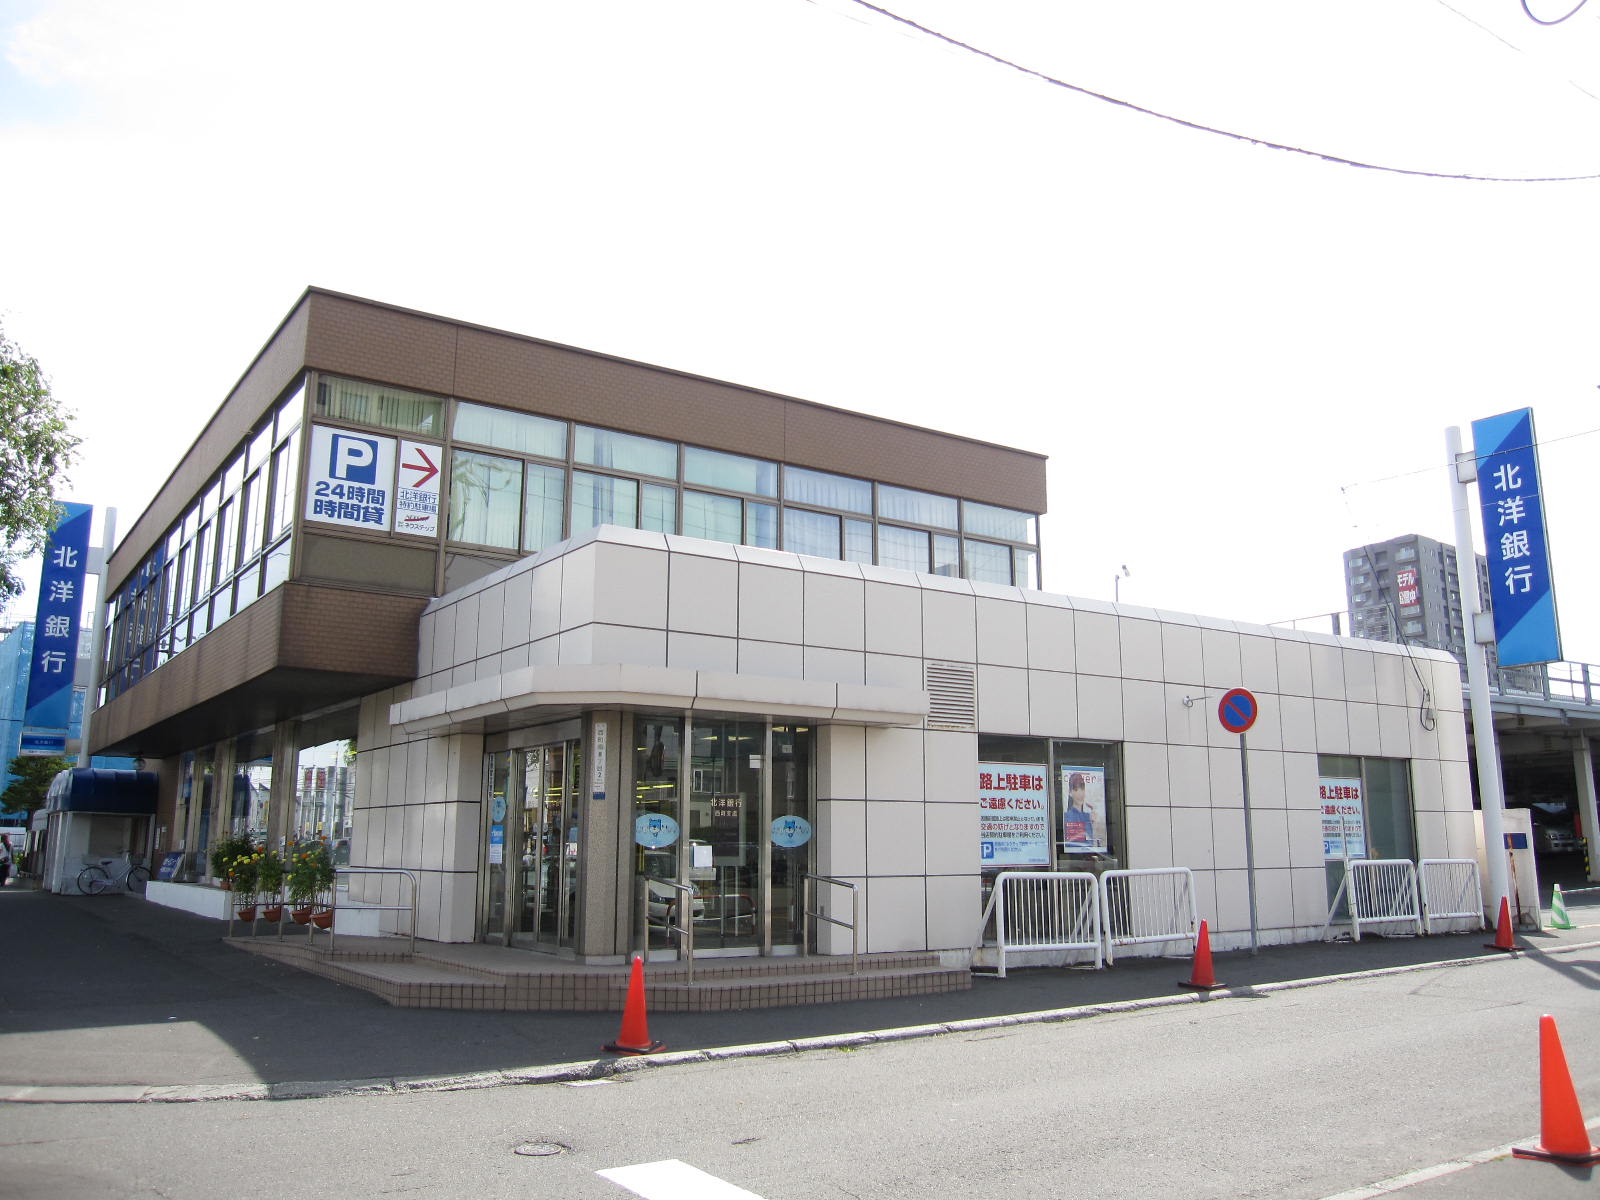 Bank. North Pacific Bank Nishimachi 600m to the branch (Bank)